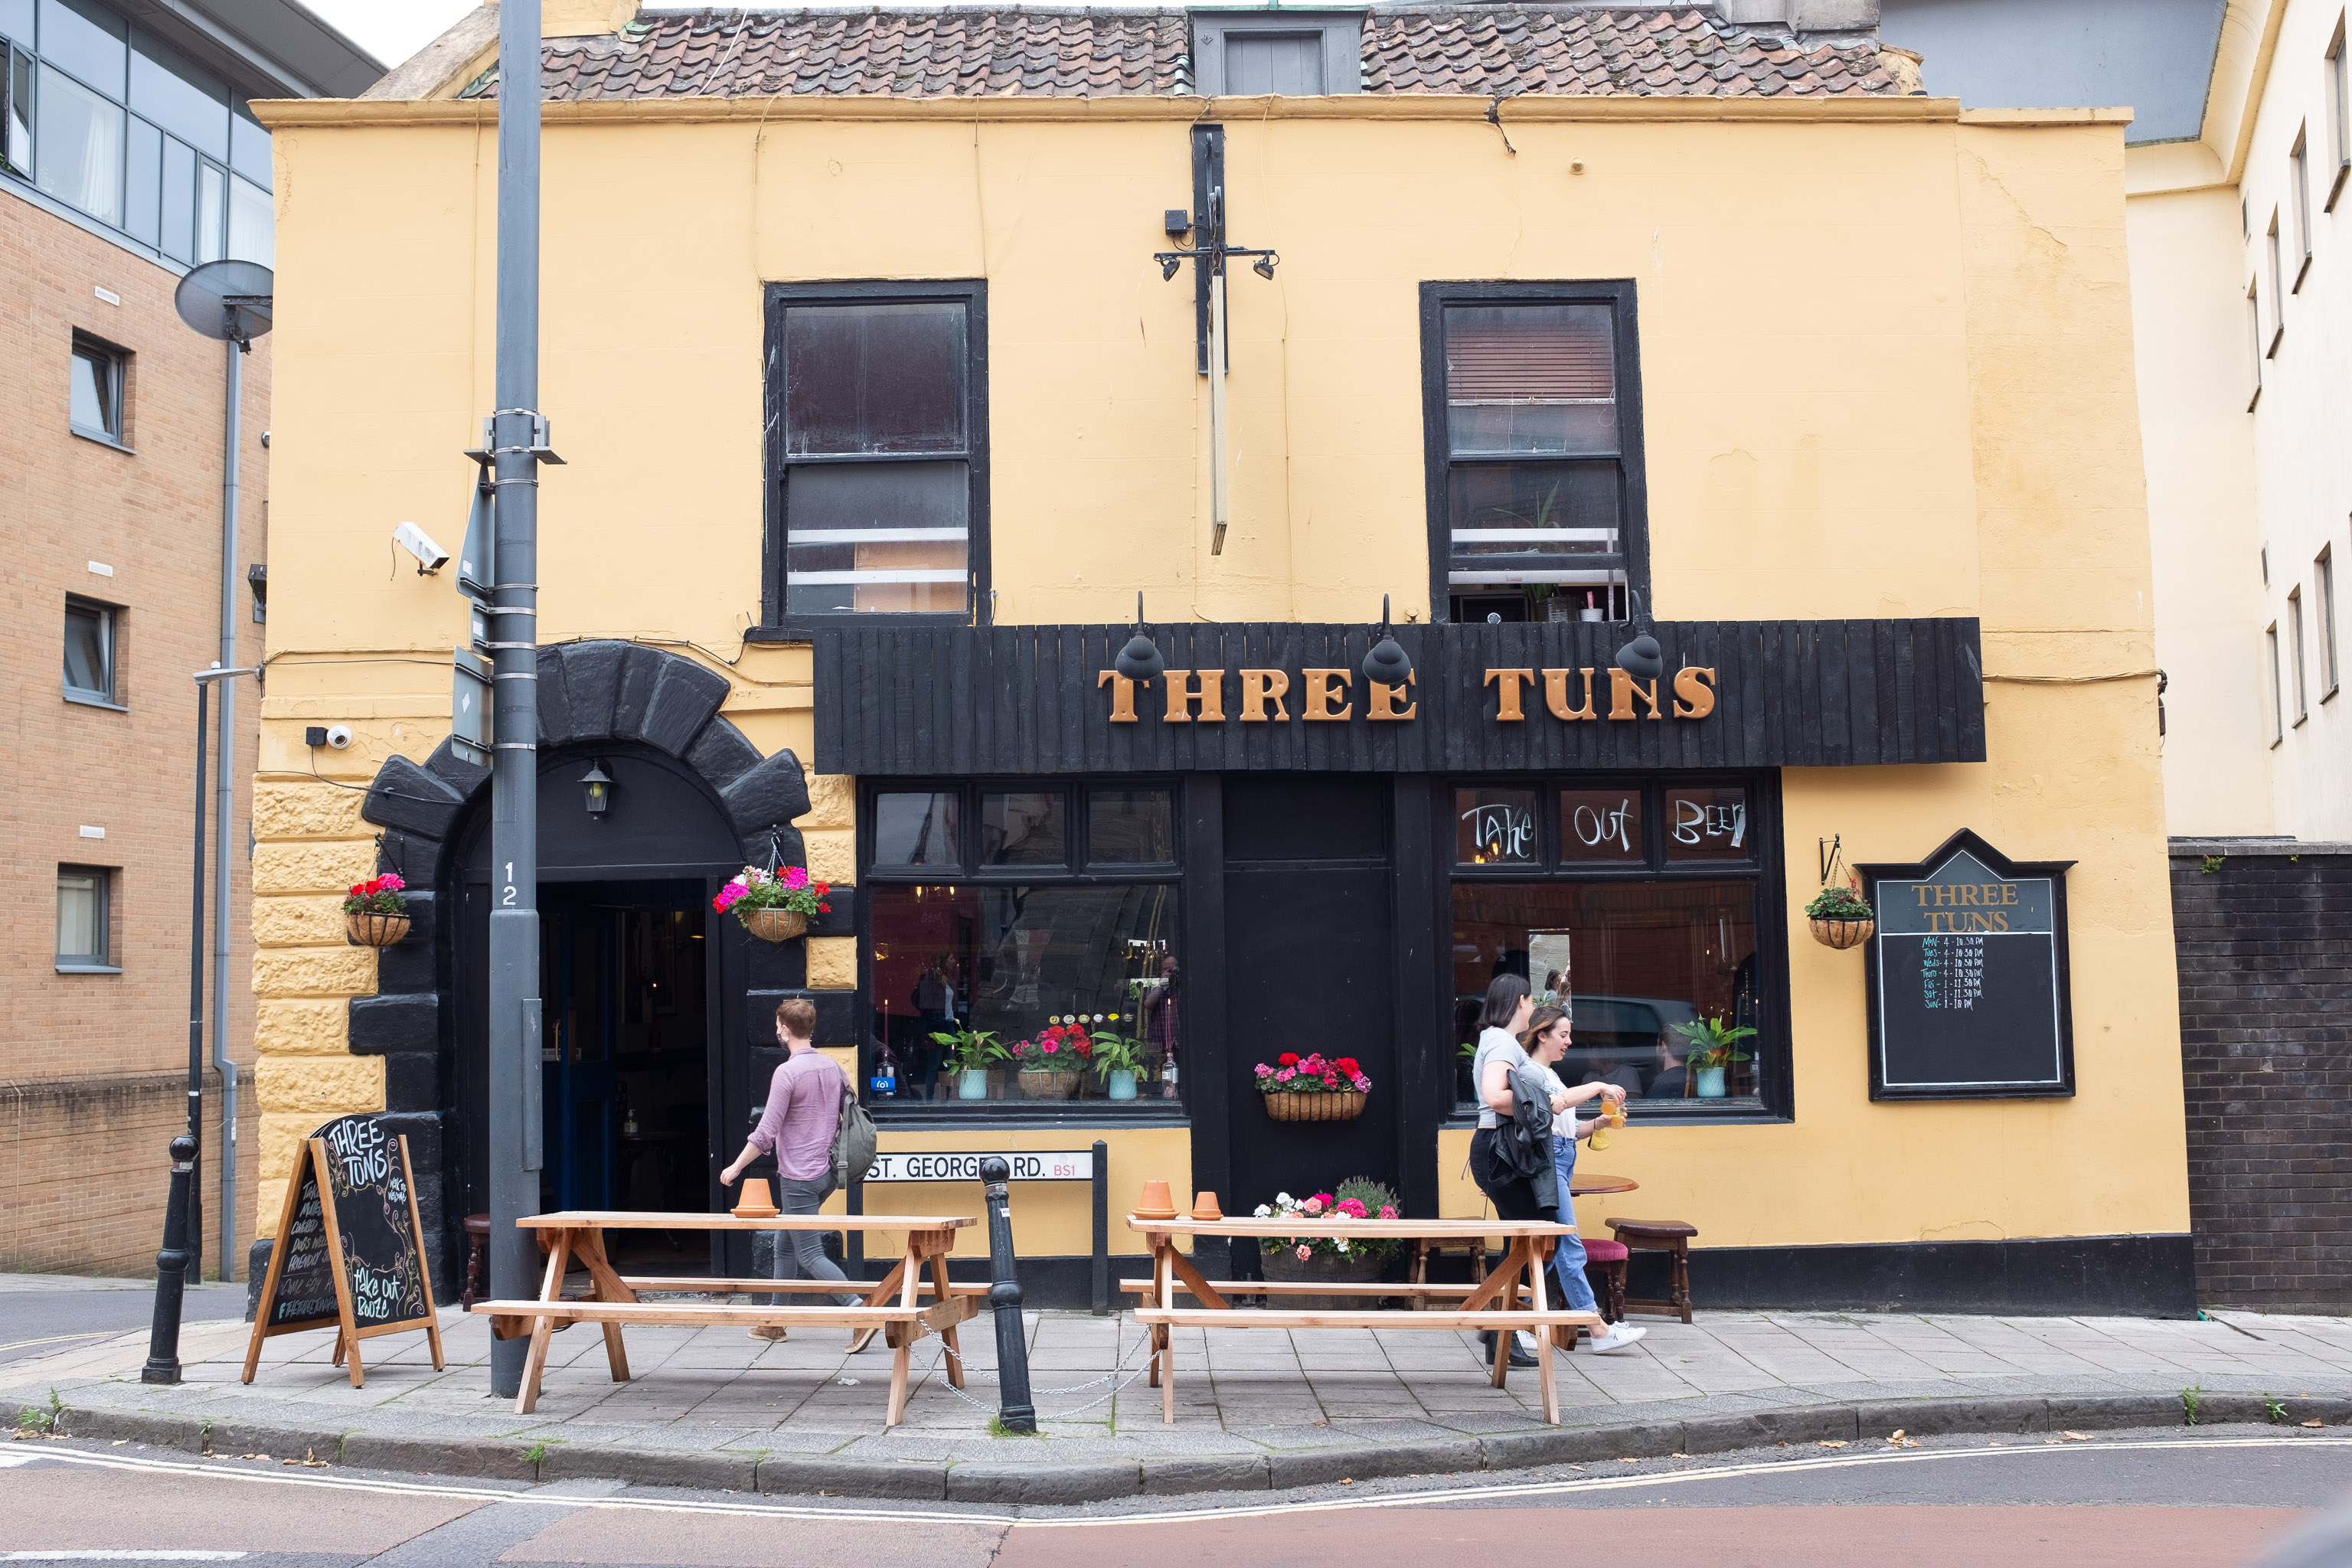 Three Tuns
Seemed to be open and busy, which is good. It's always been a good, friendly pub, but I understand it's been on the verge of closure a couple of ti...